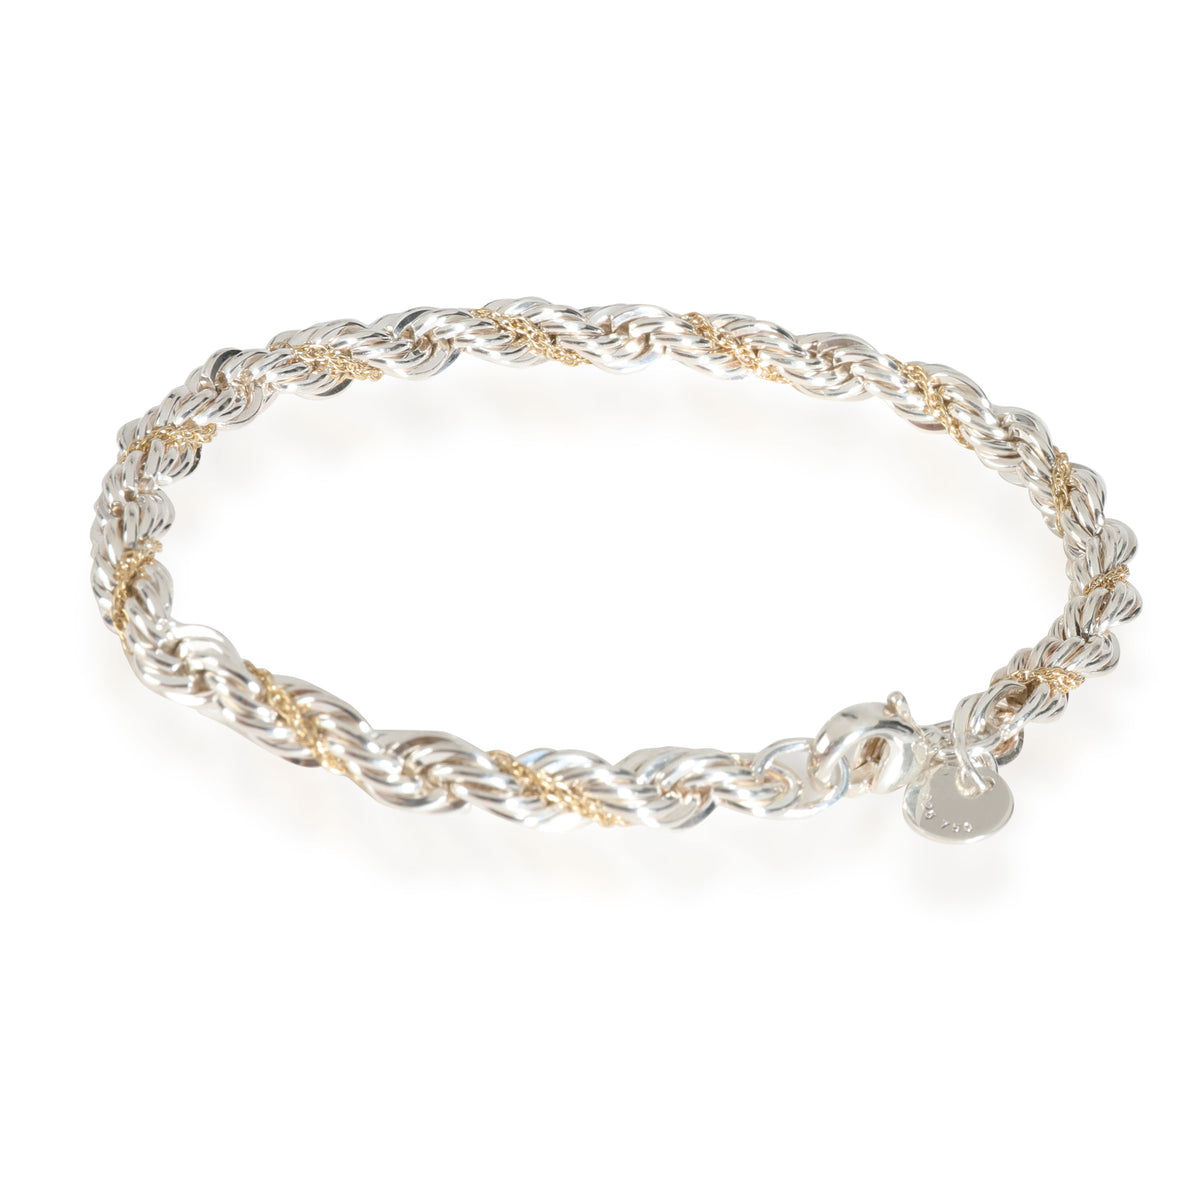 Tiffany & Co. Twisted Rope Bracelet in 18K Yellow Gold/Sterling Silver